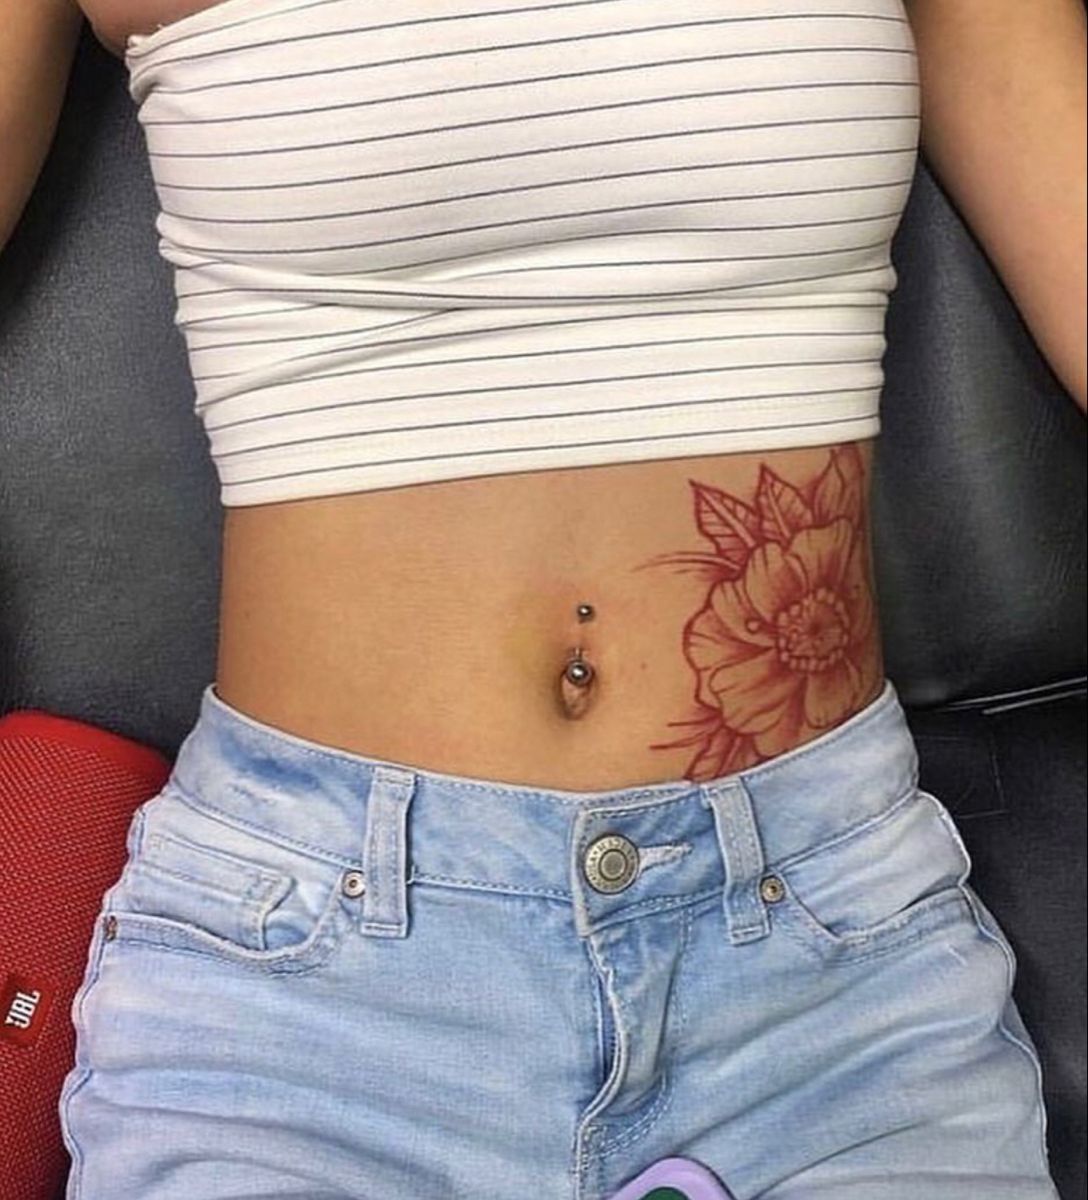 alejandra ceja recommends small side stomach tattoos for females pic